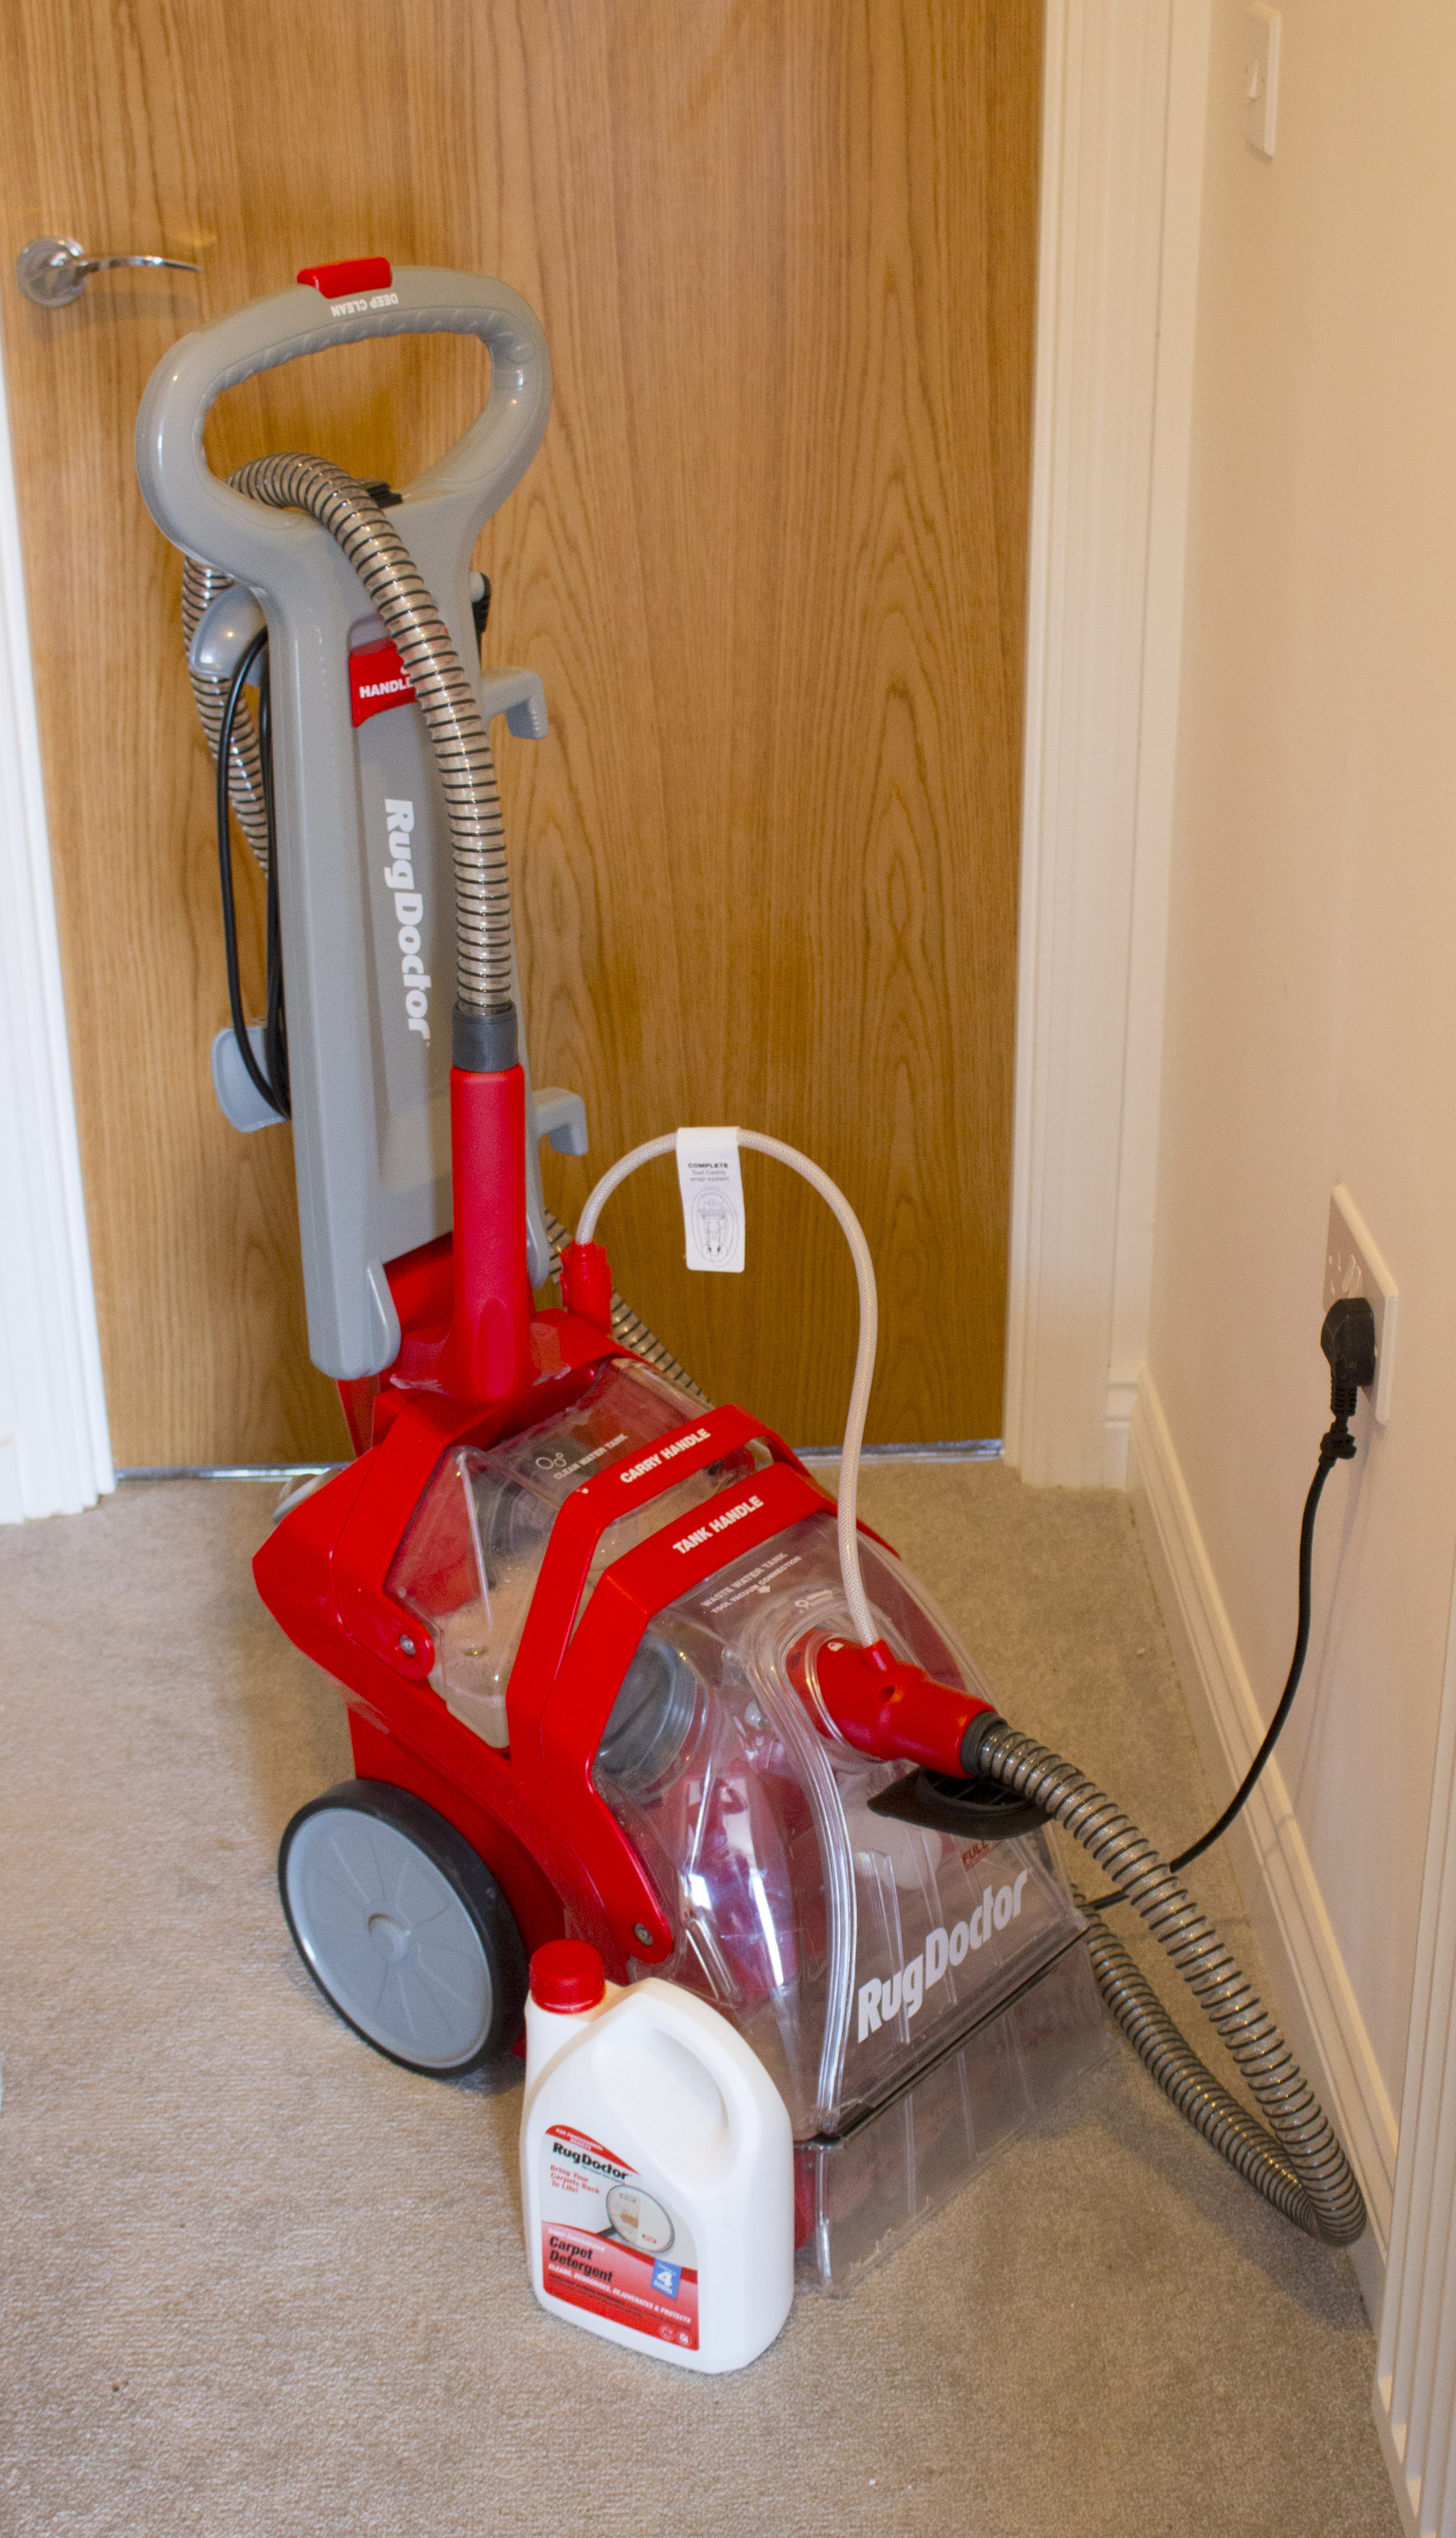 The Rug Doctor Deep Carpet Cleaner comes to my resuce - Dad Blog UK